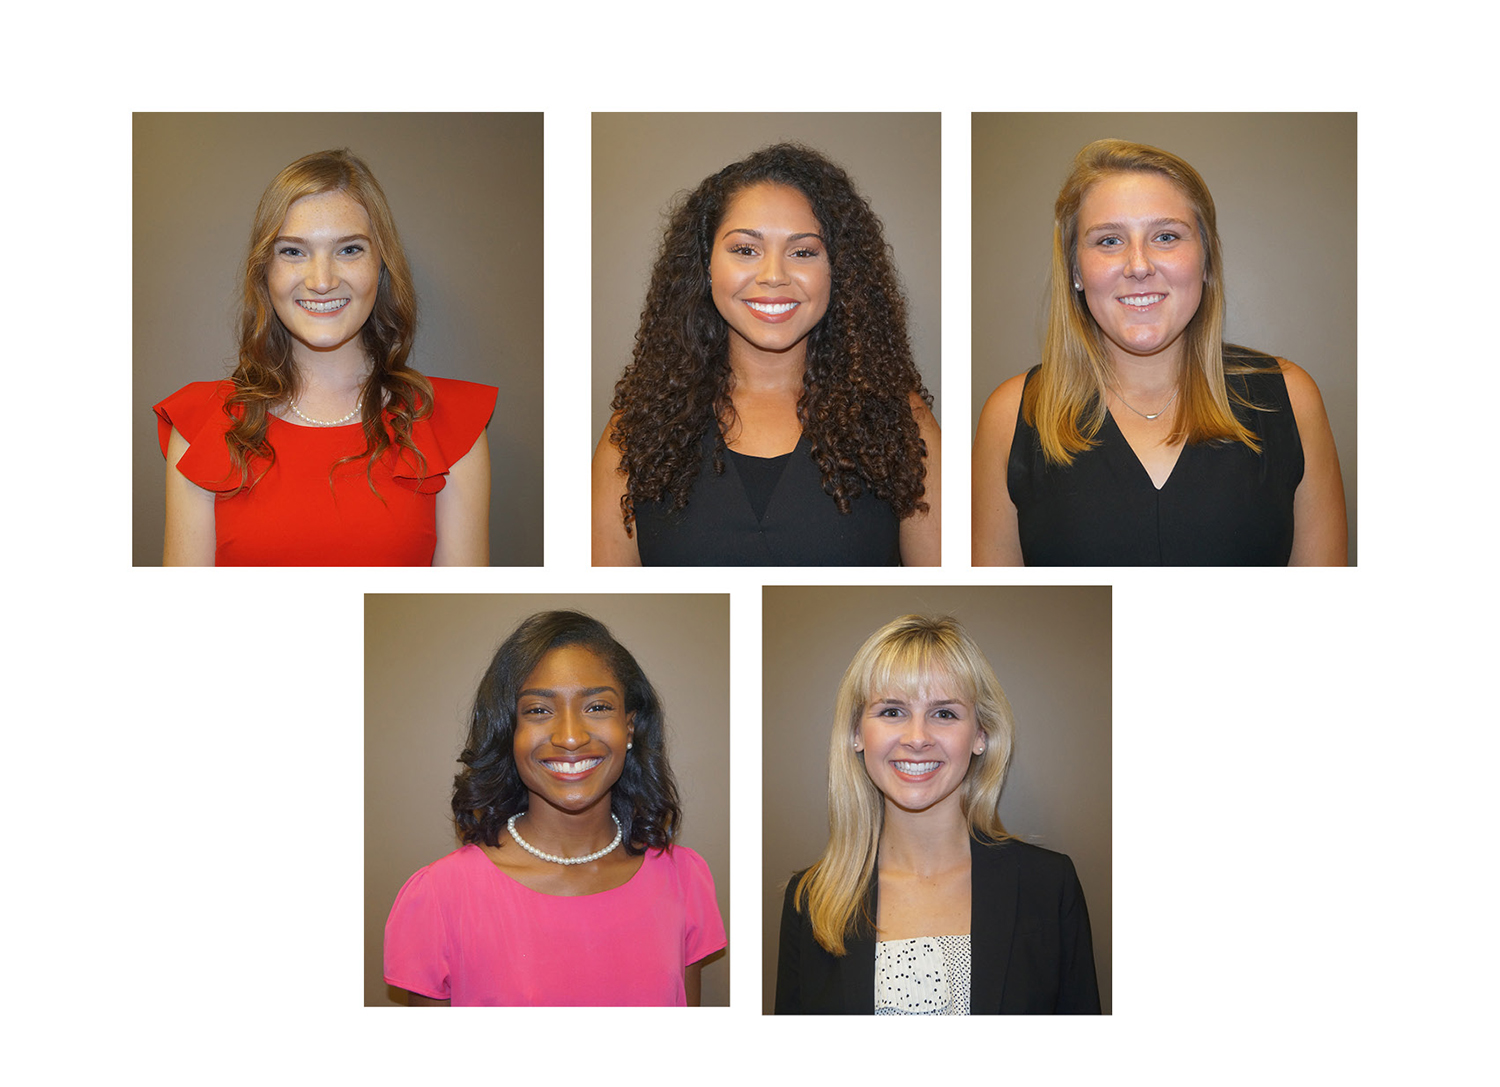 2018 Homecoming Court Elected